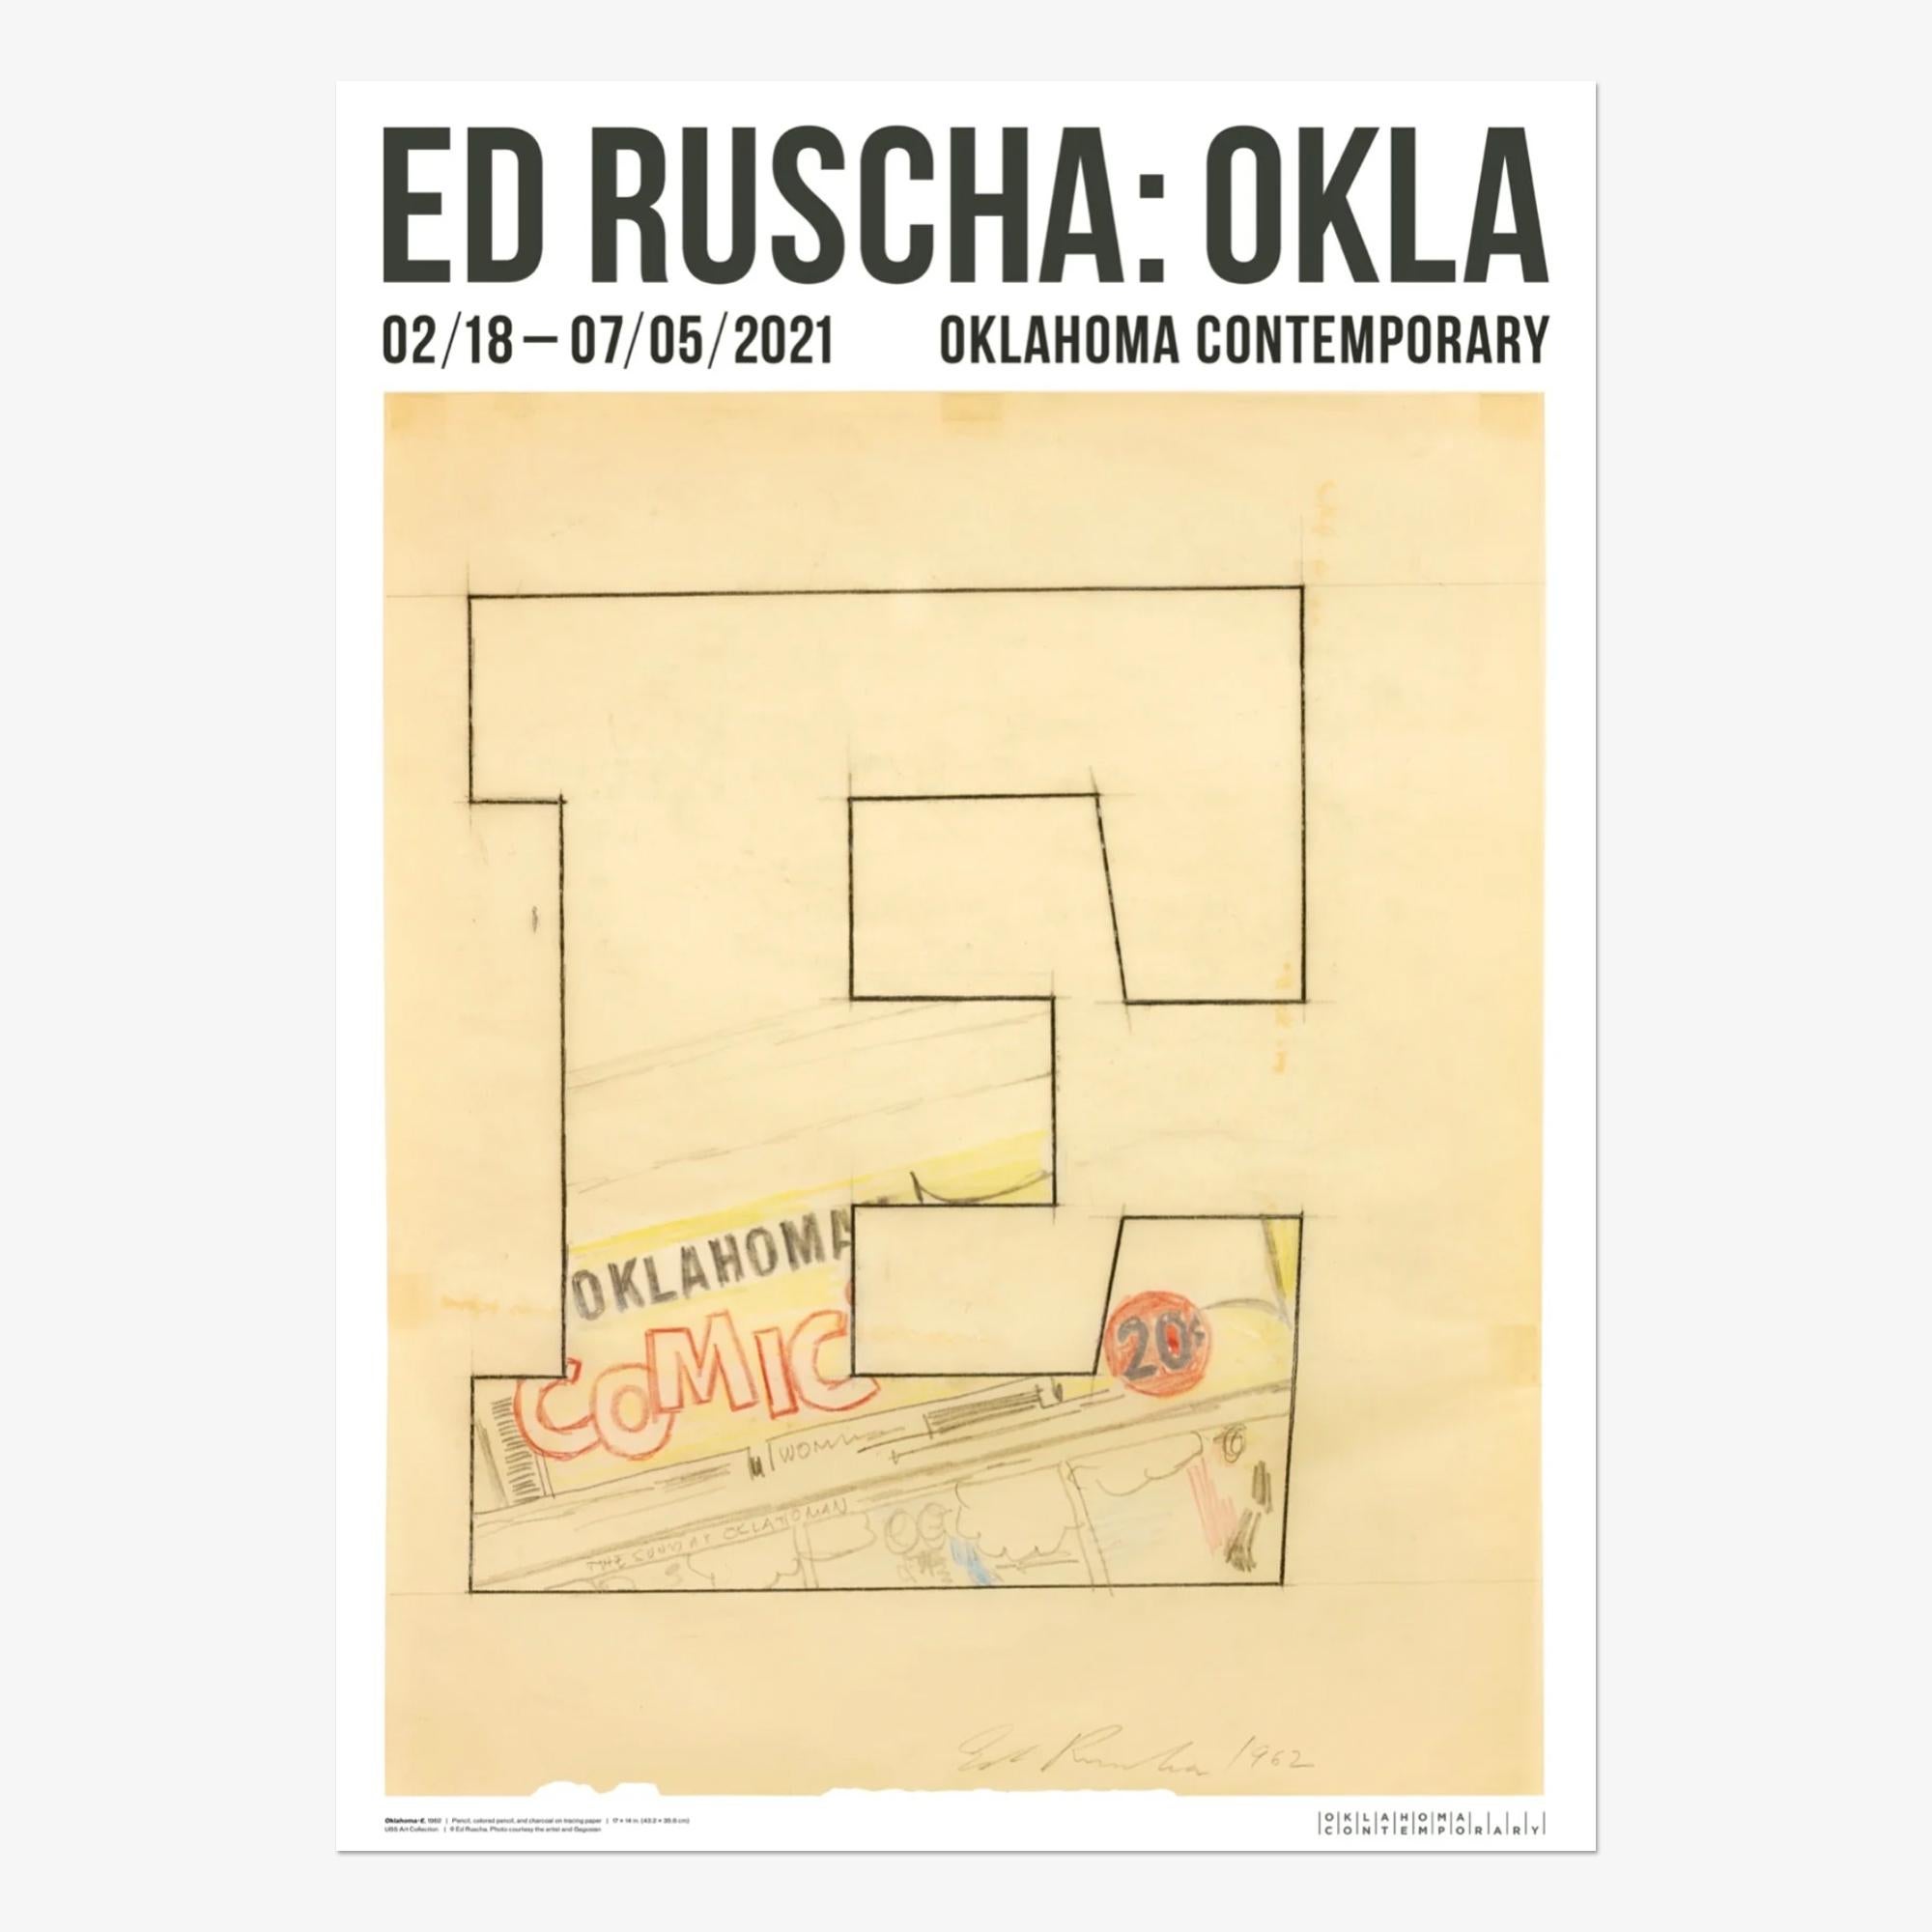 Original Oklahoma Contemporary exhibition poster, based on Ed Ruscha’s pencil and charcoal drawing named Oklahoma-E from 1962.

Ed Ruscha (American, b. 1937)
Ed Ruscha: OKLA, 2021
Medium: Offset print on Hahnemuhle fine art paper
Dimensions: 24.75 x